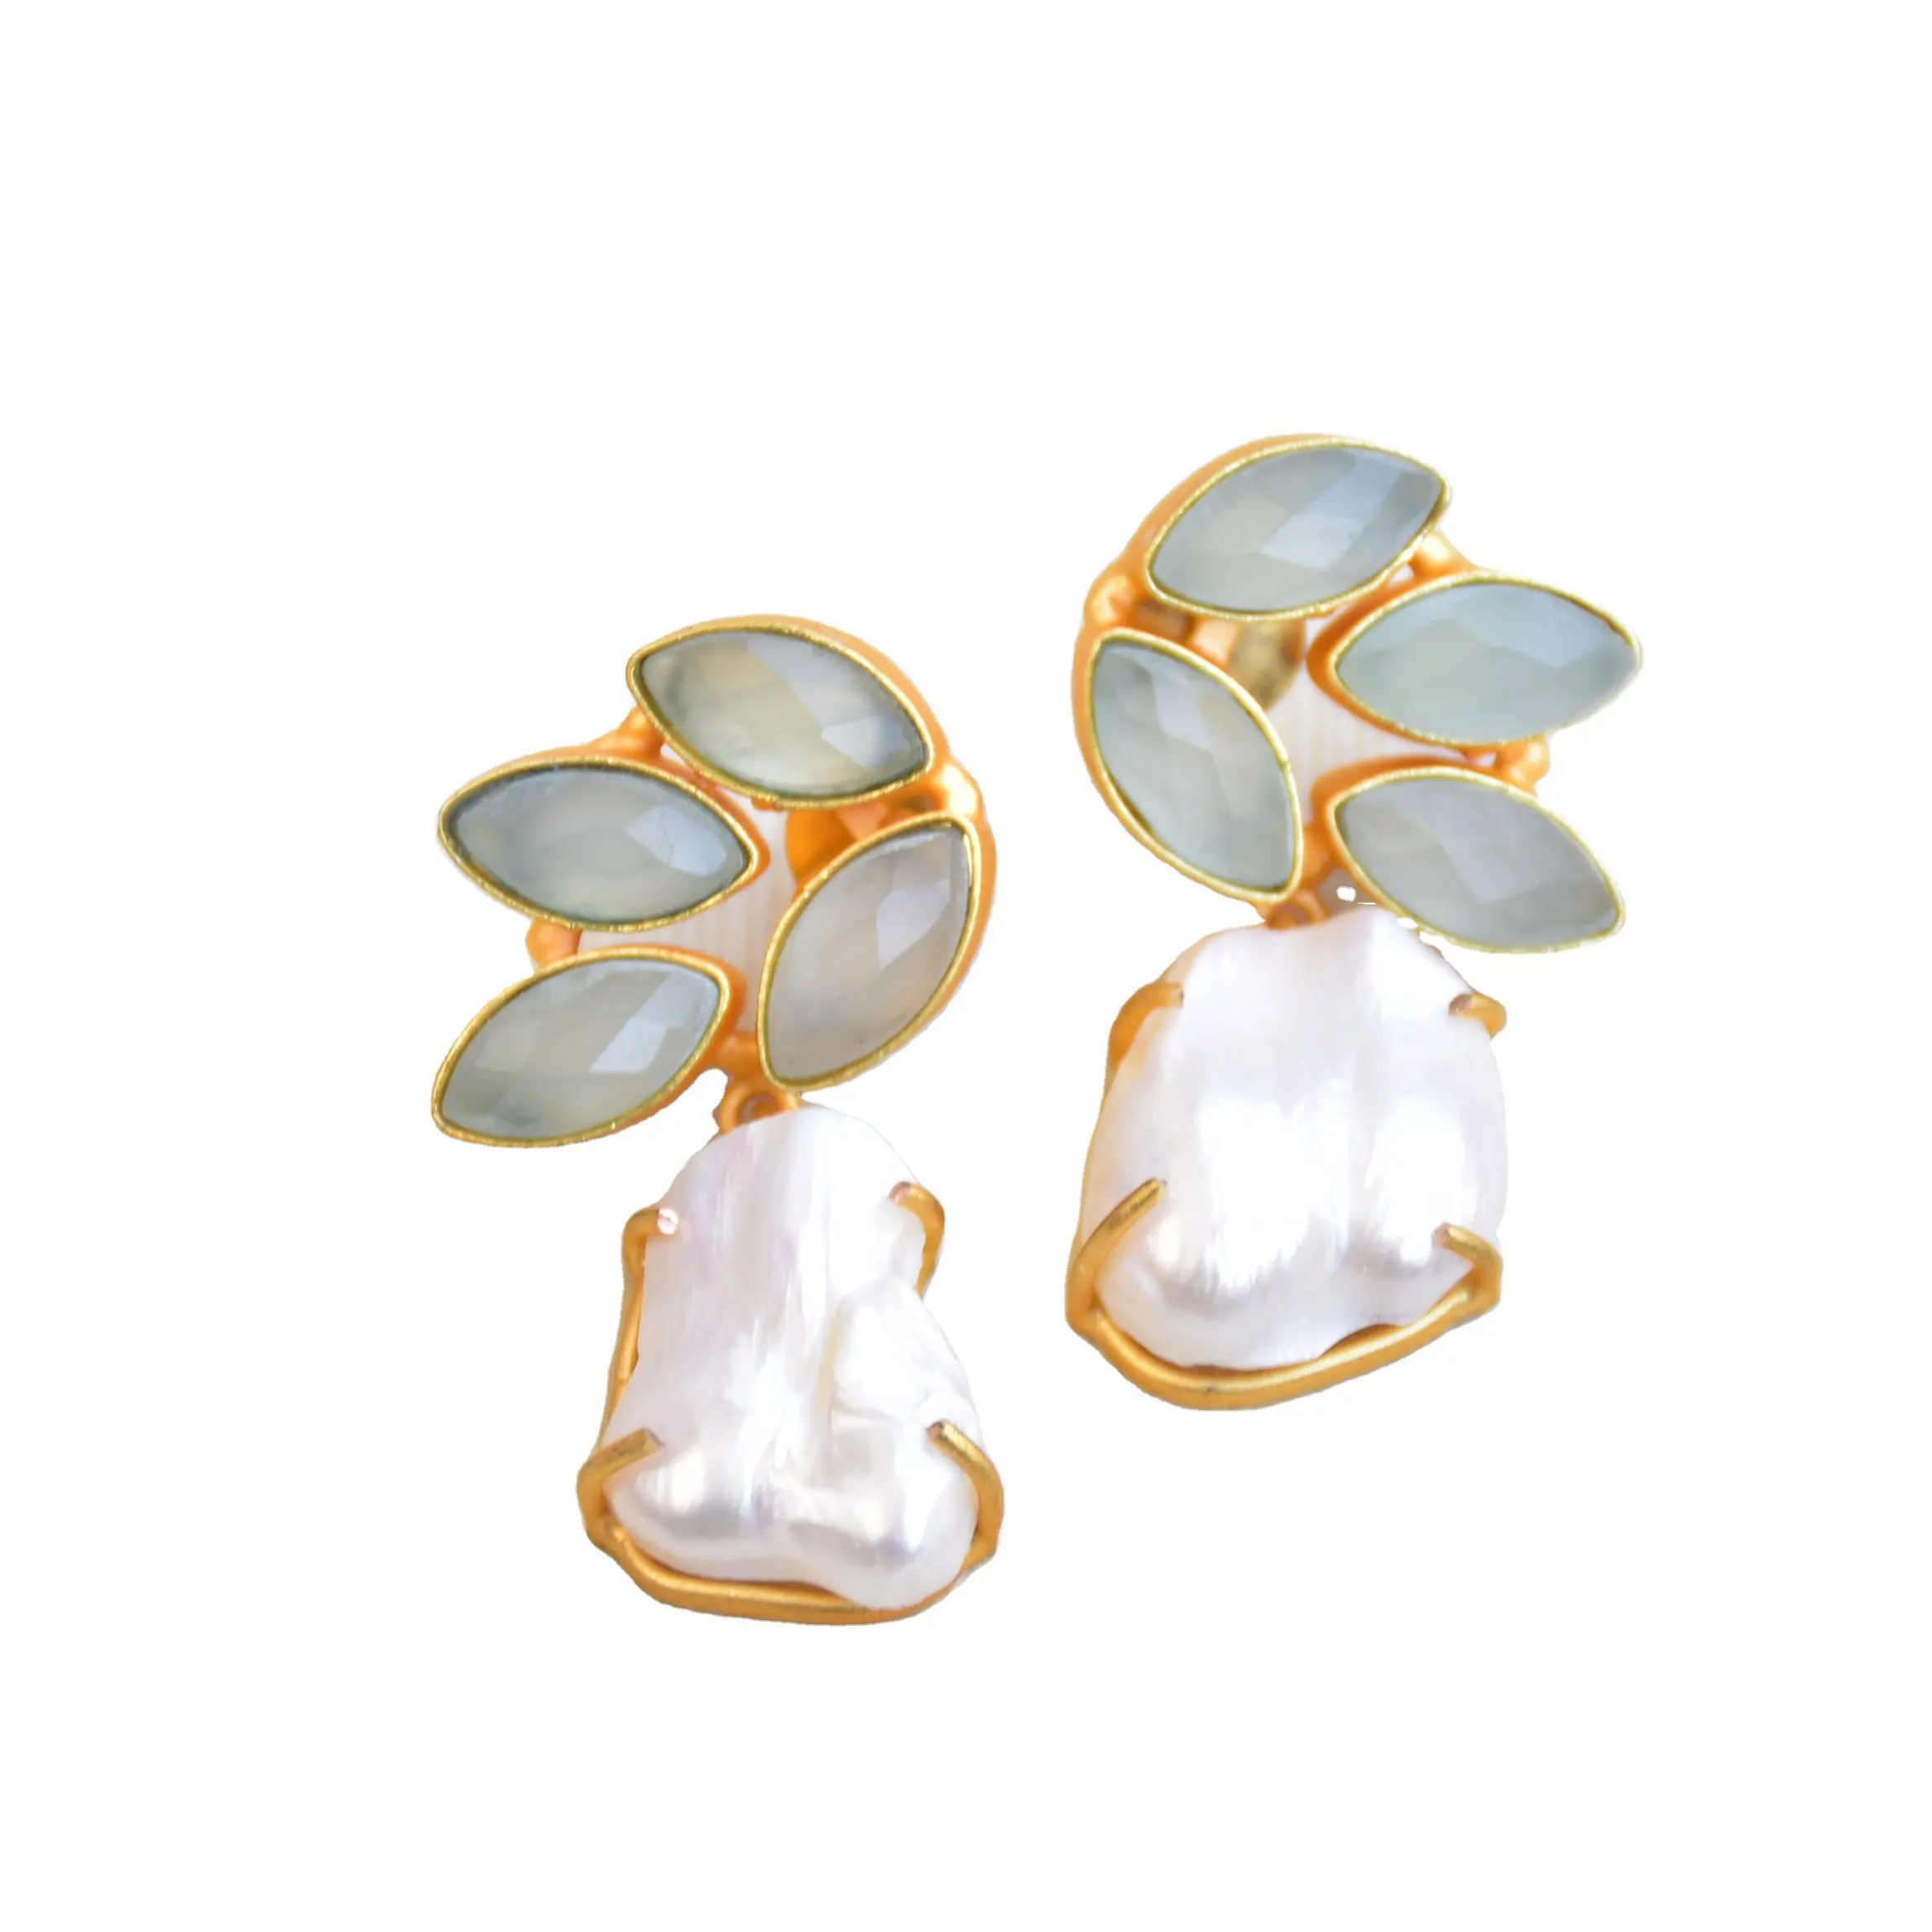 Gold Plated wholesale jewelry Earrings Handmade fine fashion jewellery Indian manufacturer and seller of Natural stone jewelry